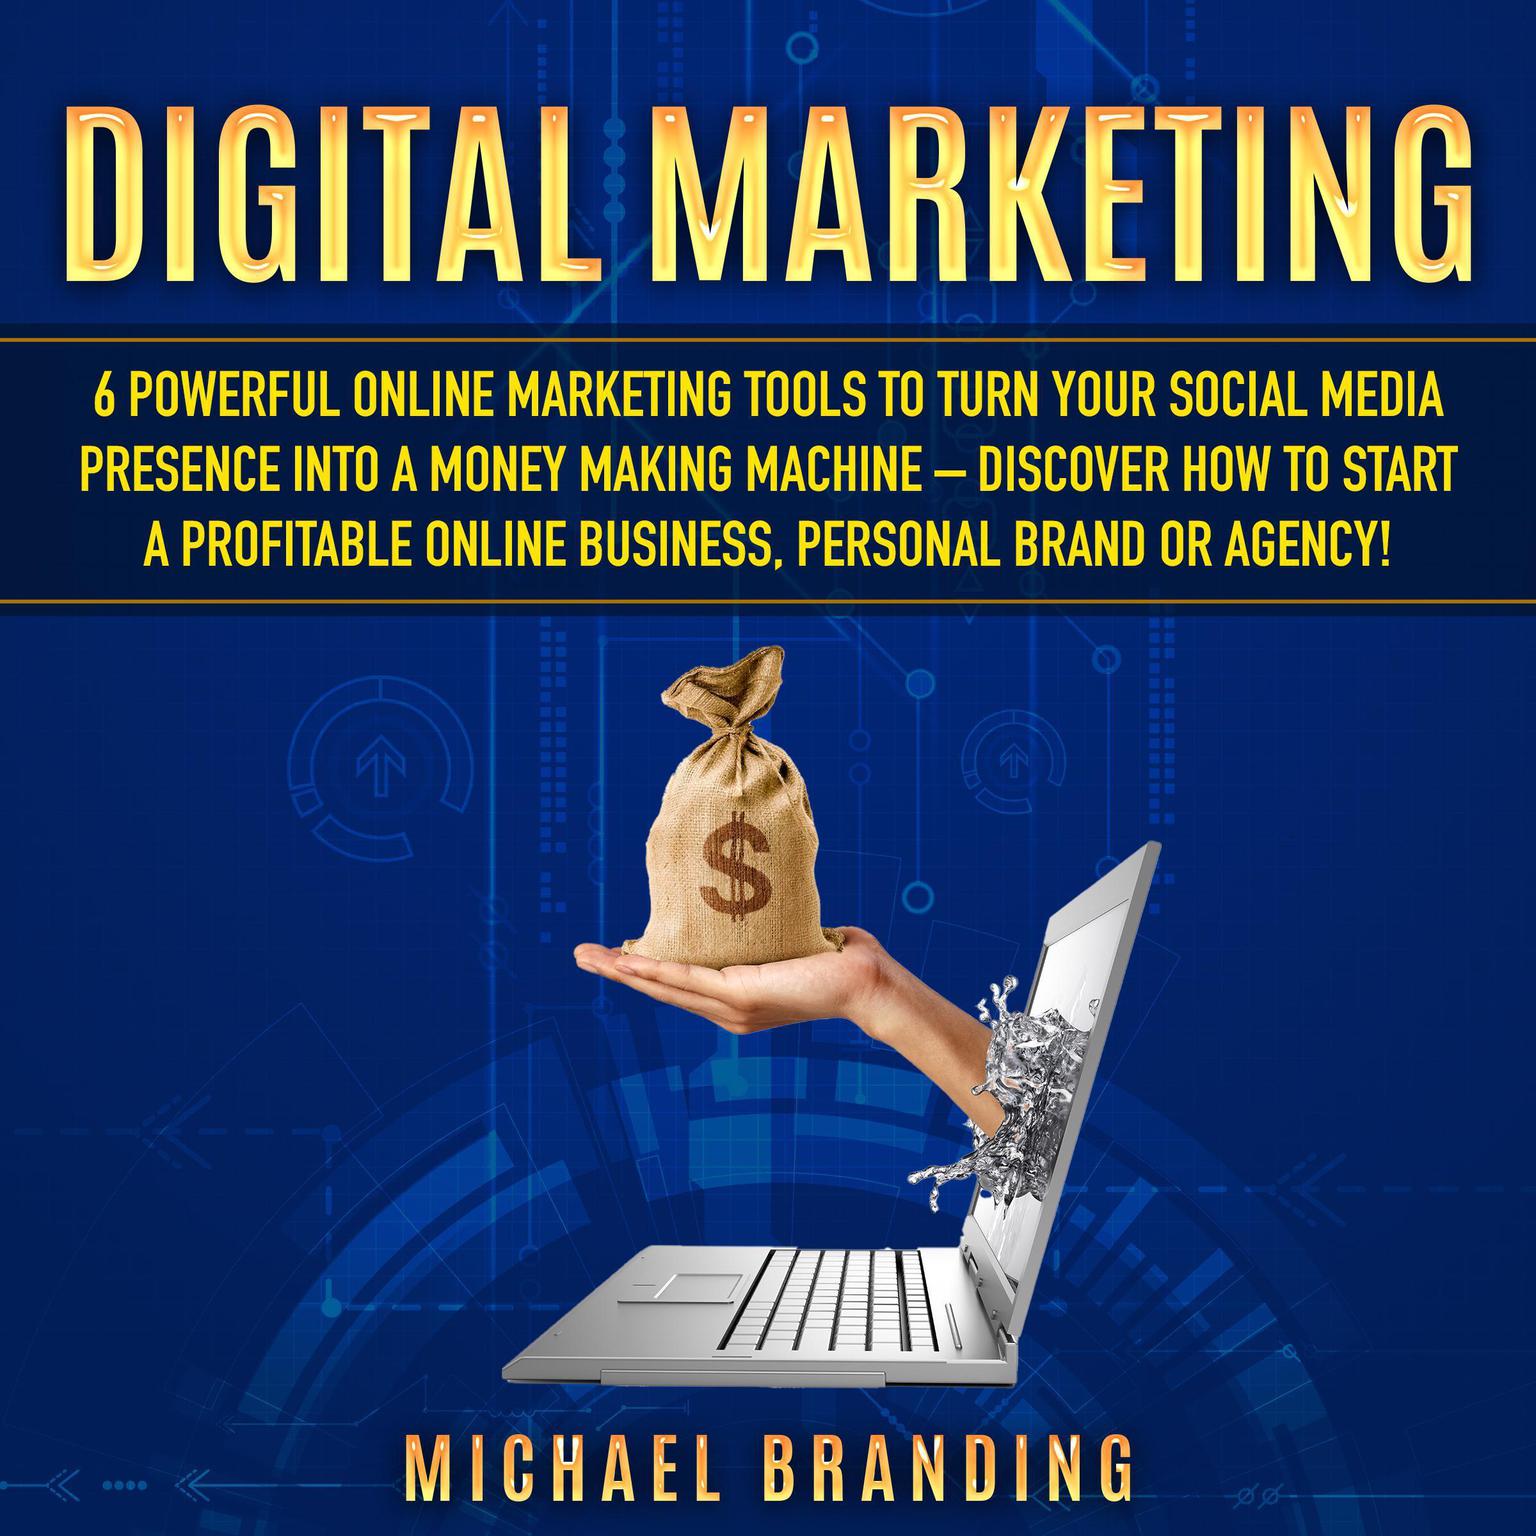 Digital Marketing for Beginners 2021: Revolutionize Your Business, Agency or Personal Brand with the Secret Social Media Marketing Strategy - Discover the Fundamental Algorithms to Make Money Online!  Audiobook, by Michael Branding